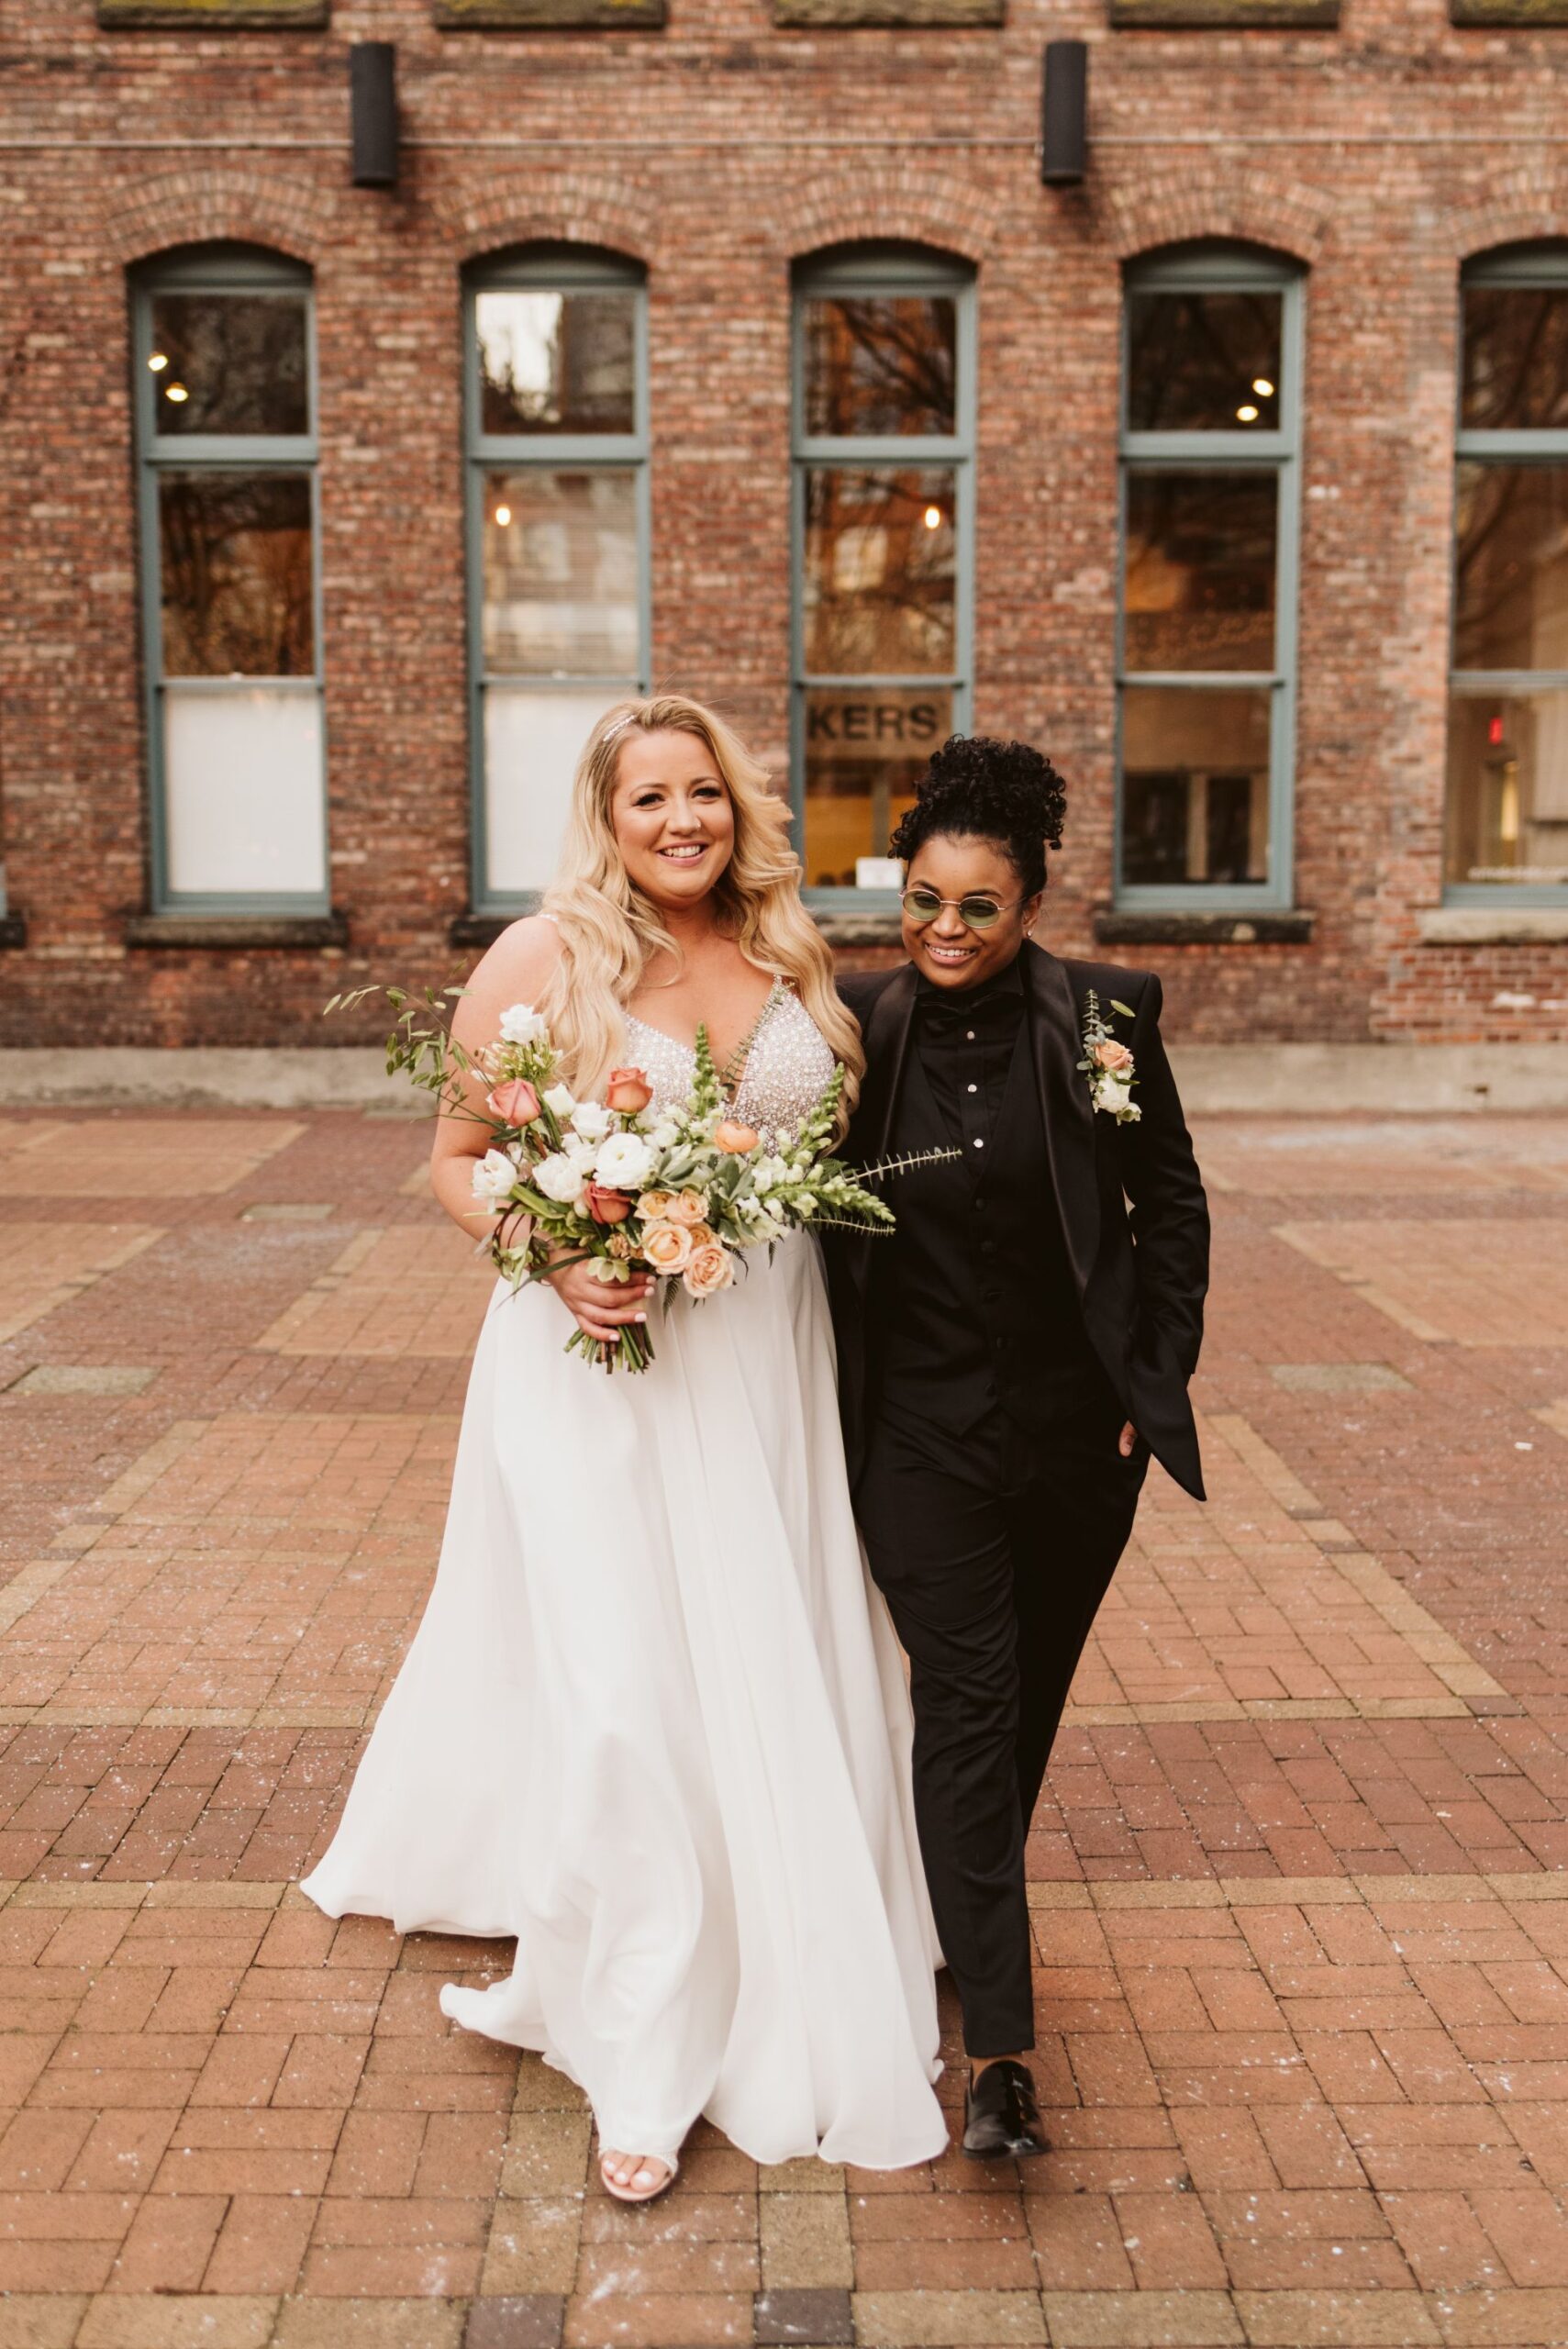 lgbtq+ couple in yaletown, vancouver wedding, inclusive wedding vendors